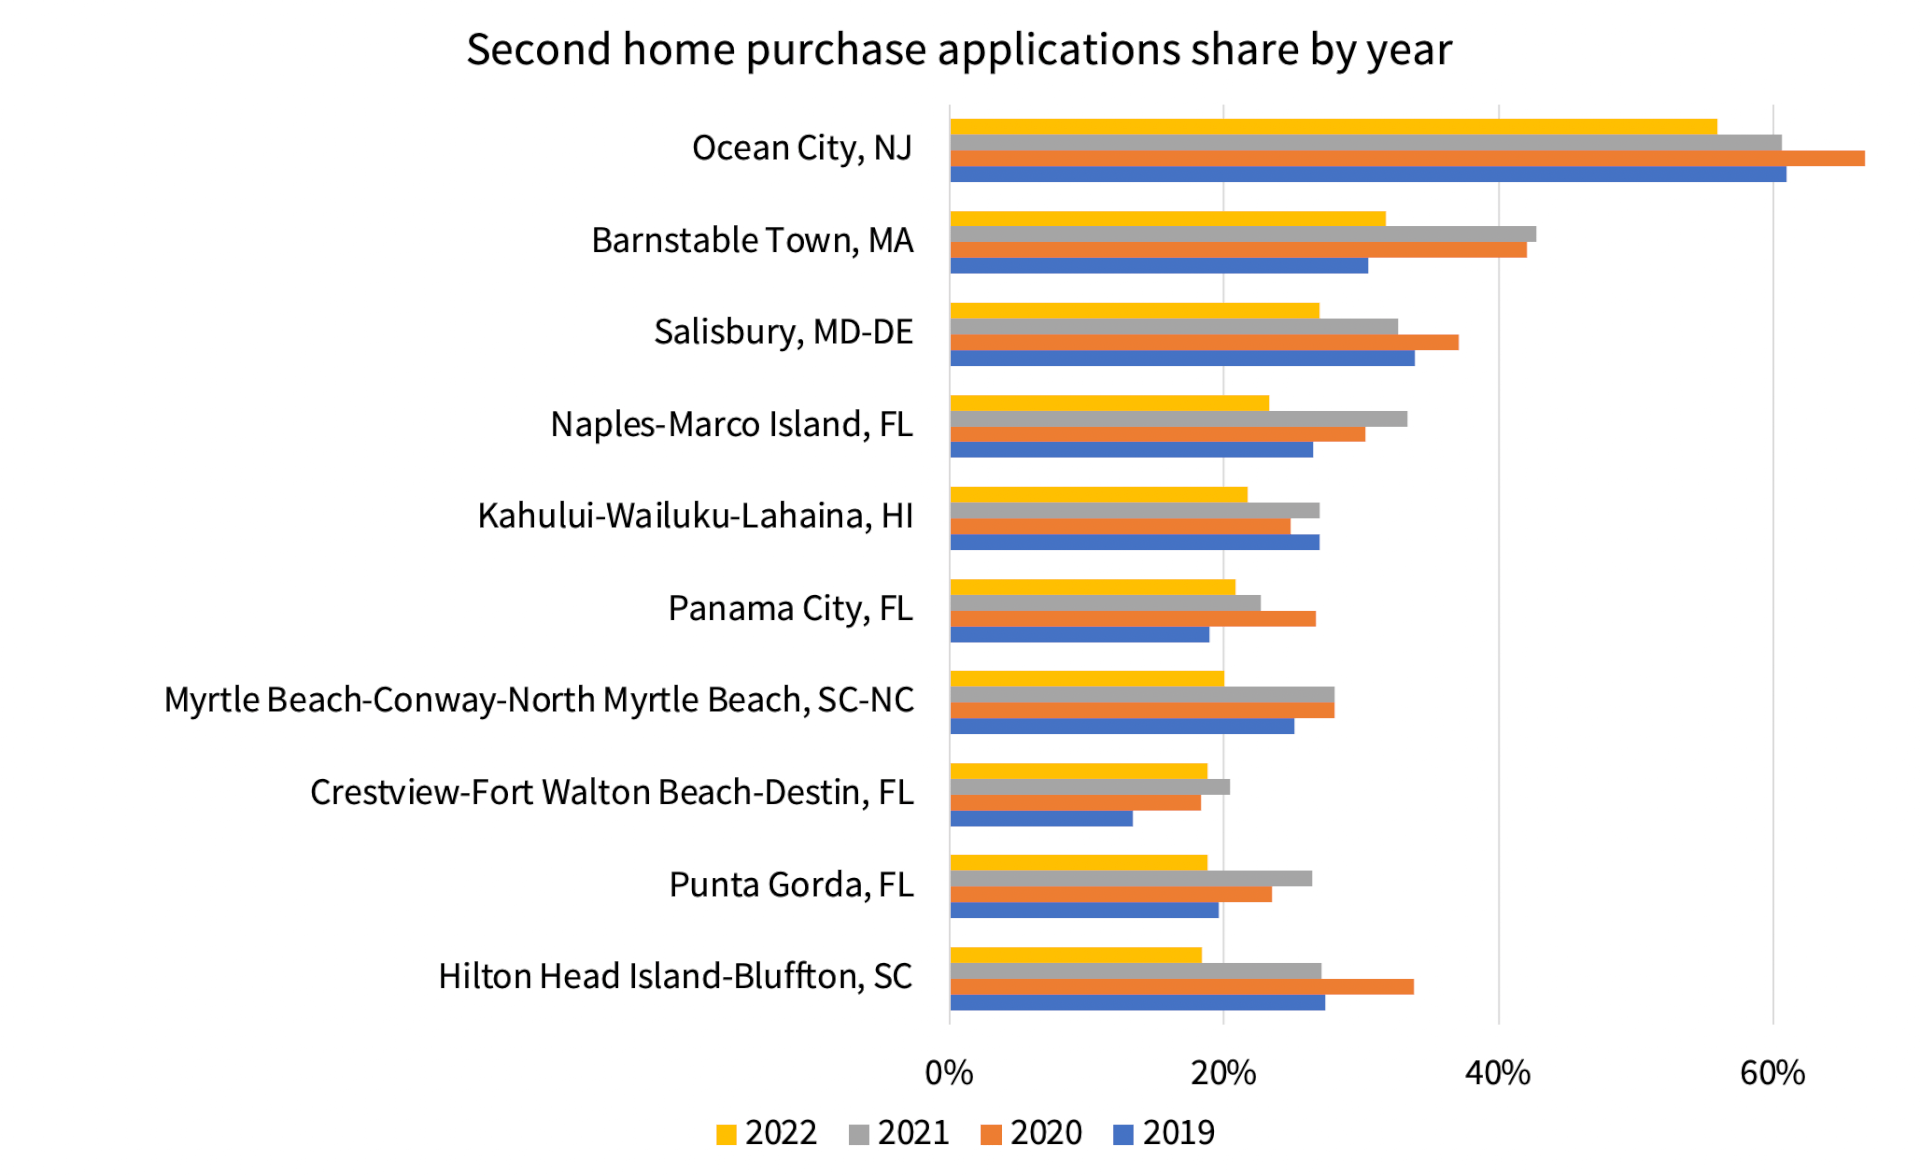 Figure 2: Top 10 metros with highest share of second home purchase applications